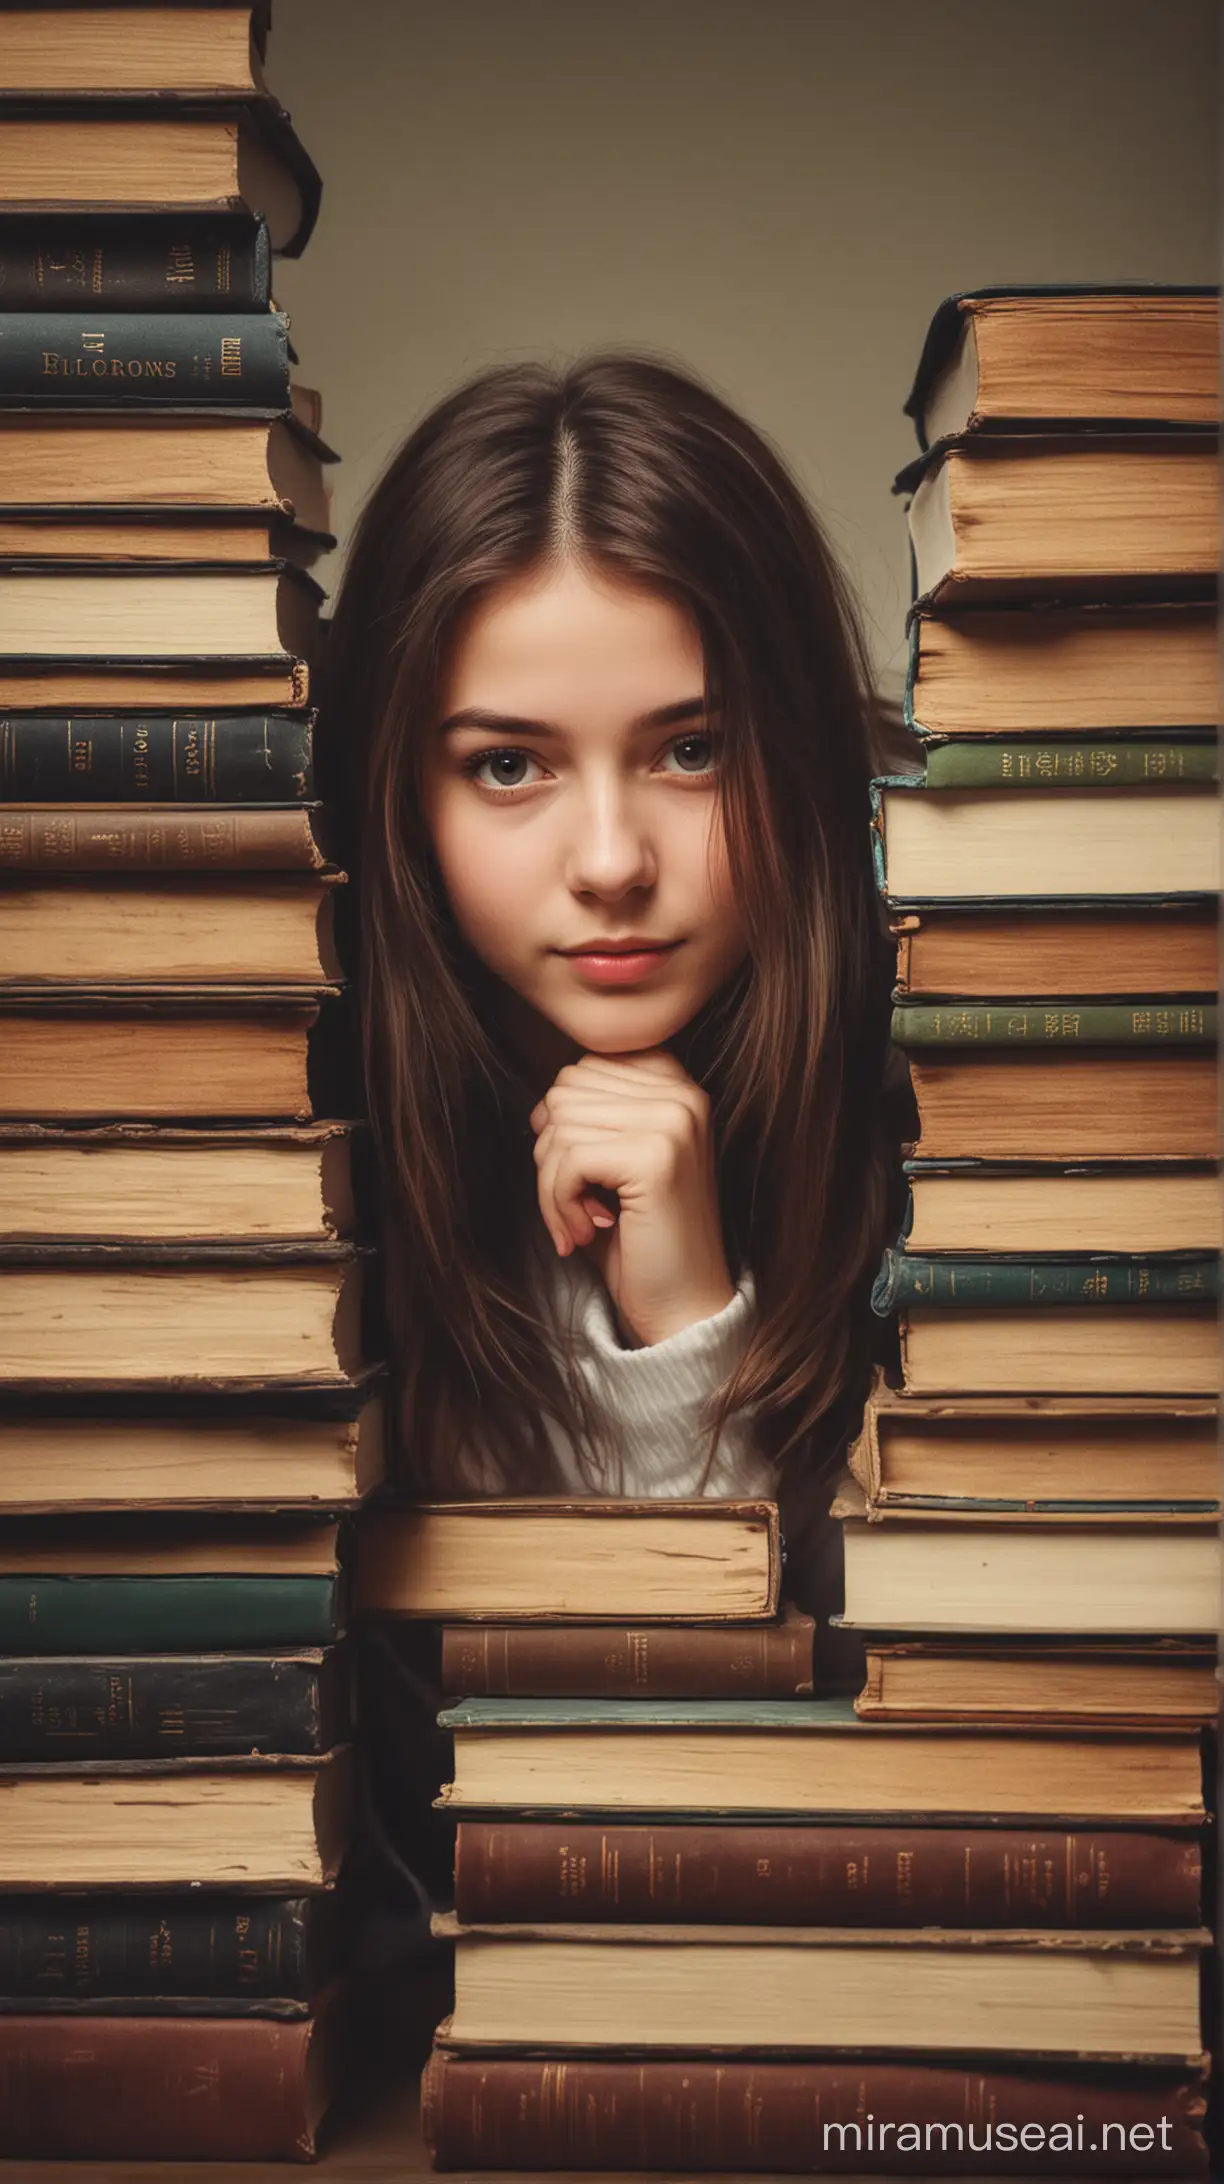 A girl with books
